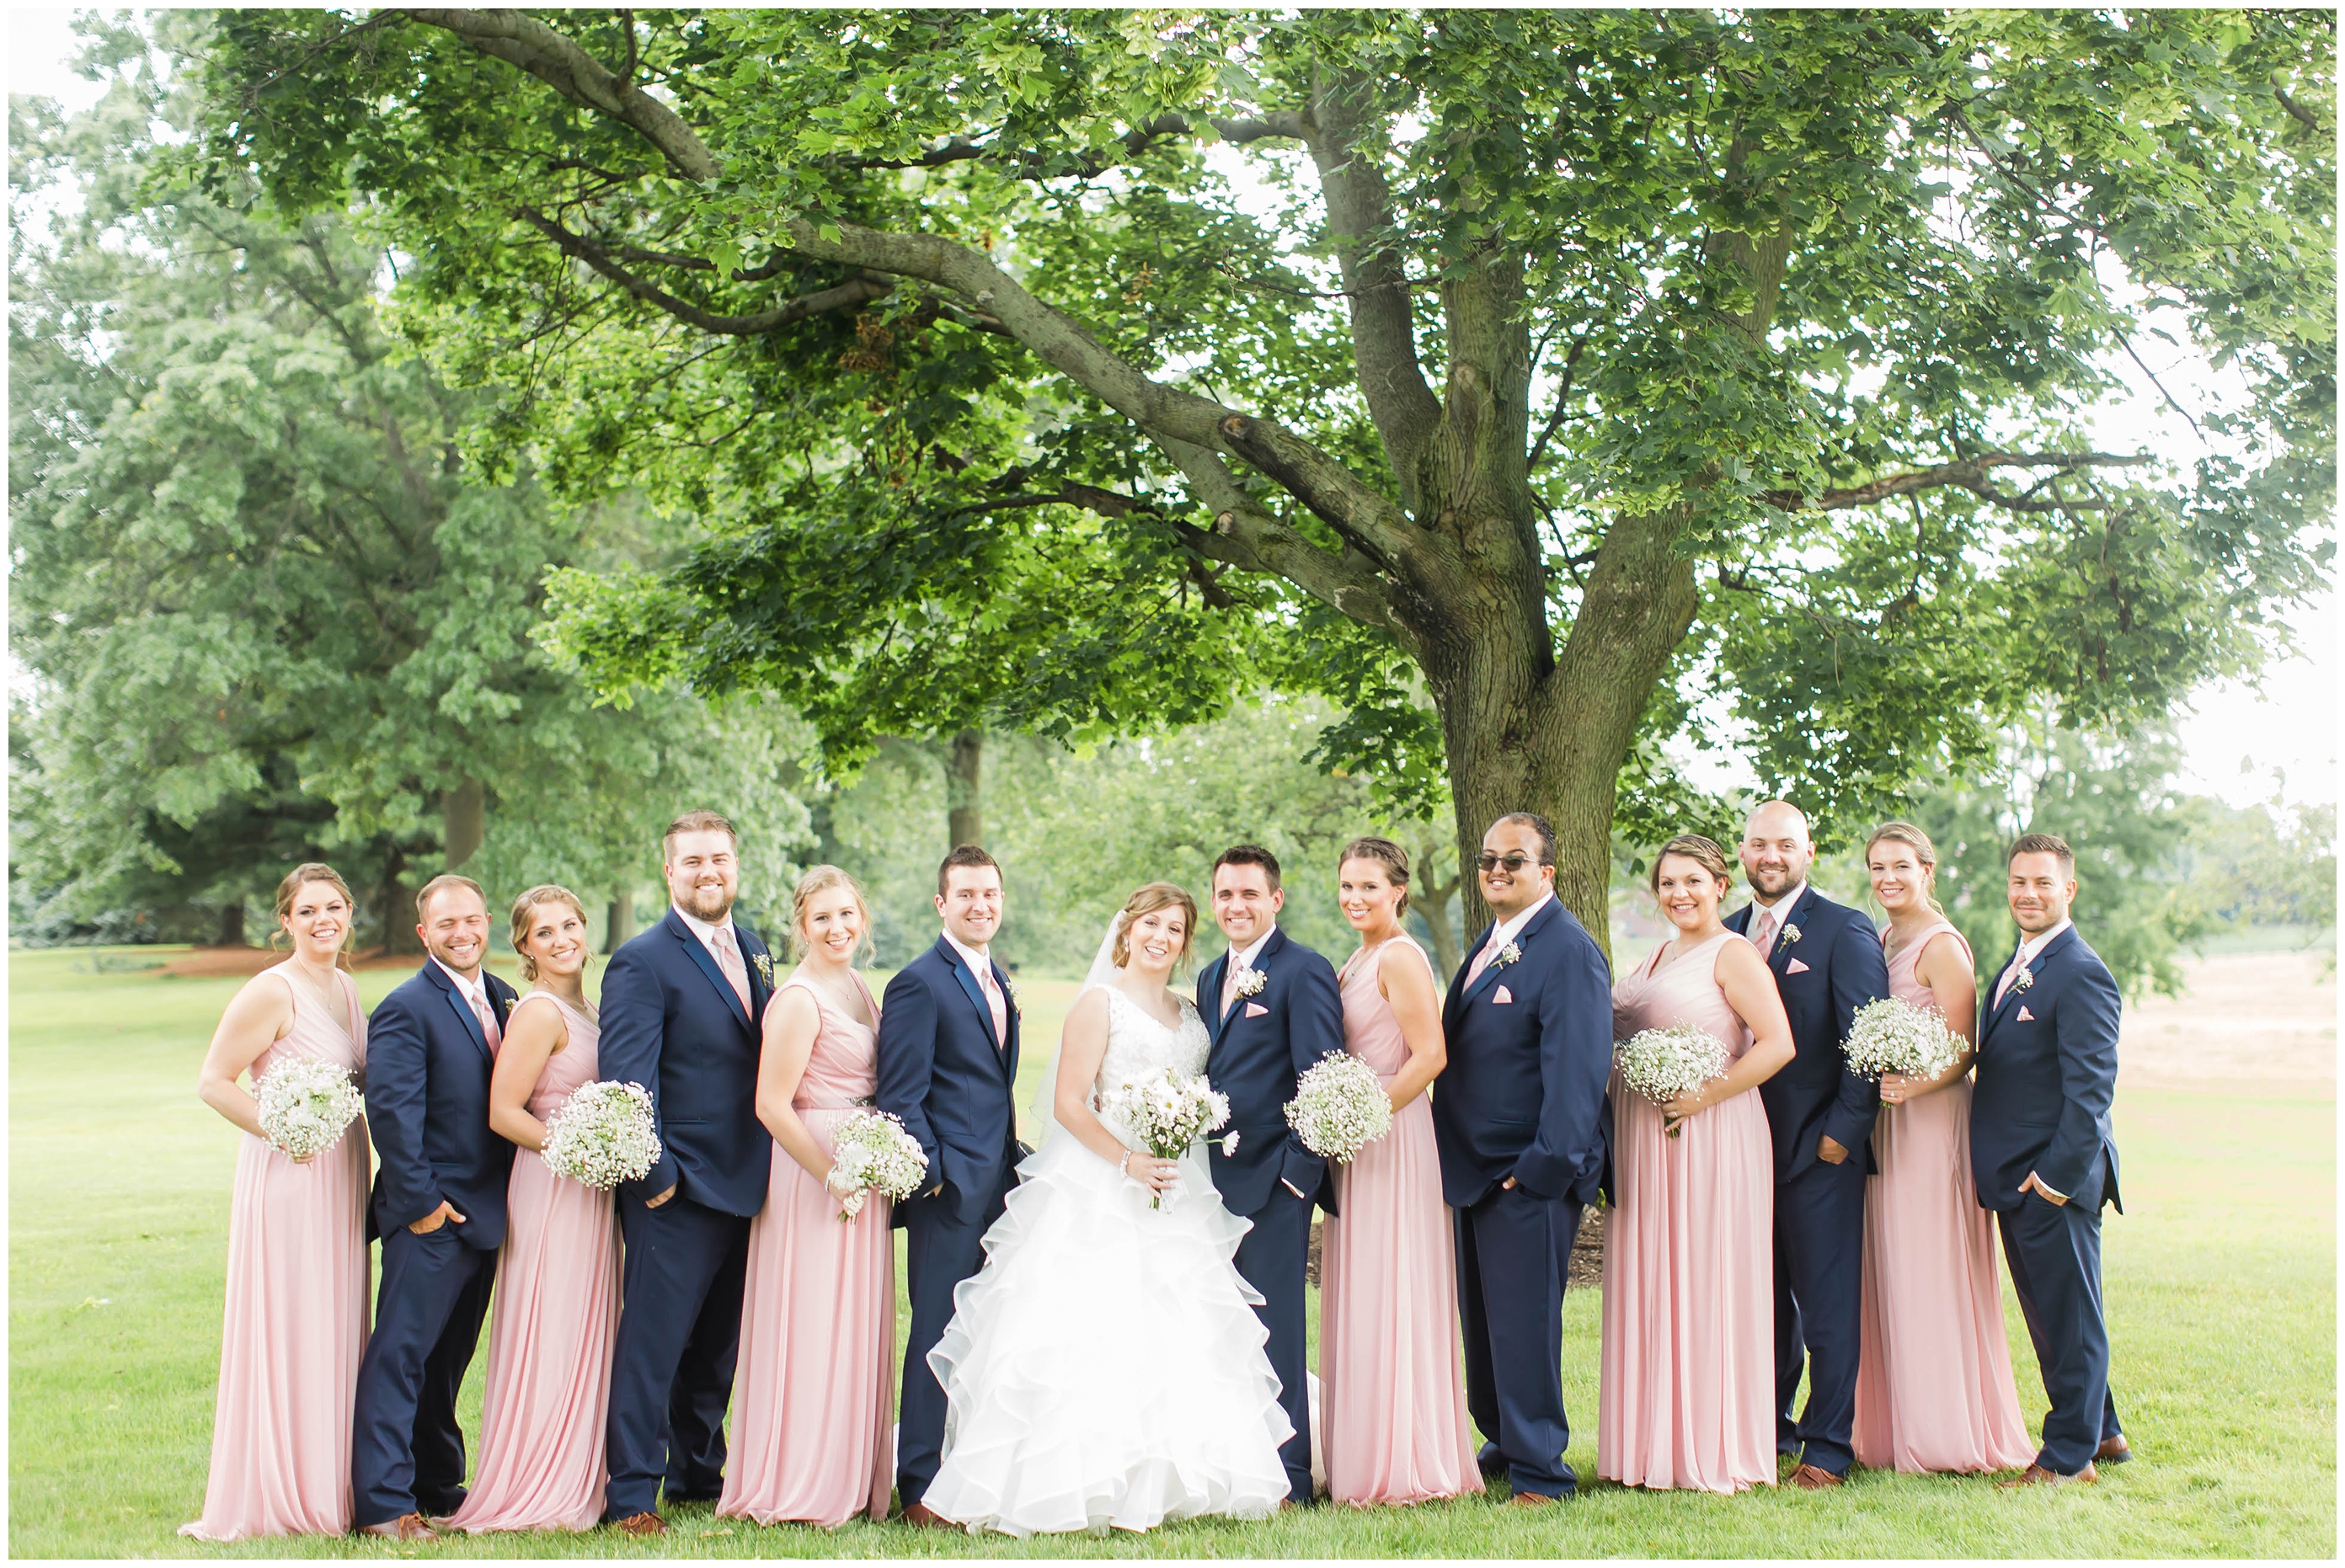 Brookside Farm Louisville Ohio,Cleveland Wedding Photographer,blush and navy blue bridal party,loren jackson photography,photographer akron ohio,rustic barn wedding,white bouquets,